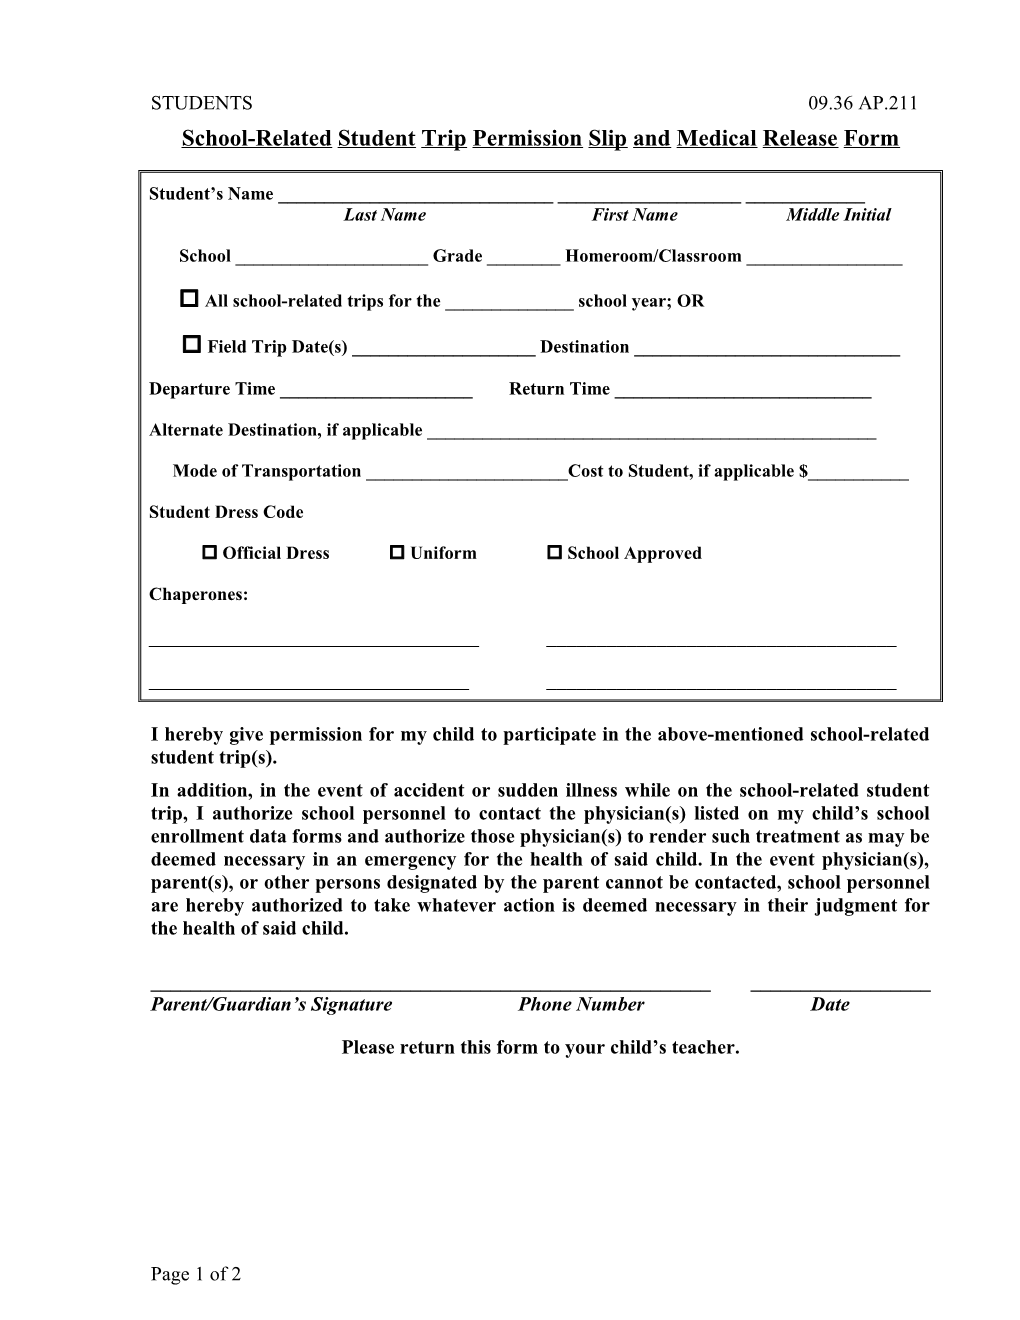 School-Related Student Trip Permission Slip and Medical Release Form